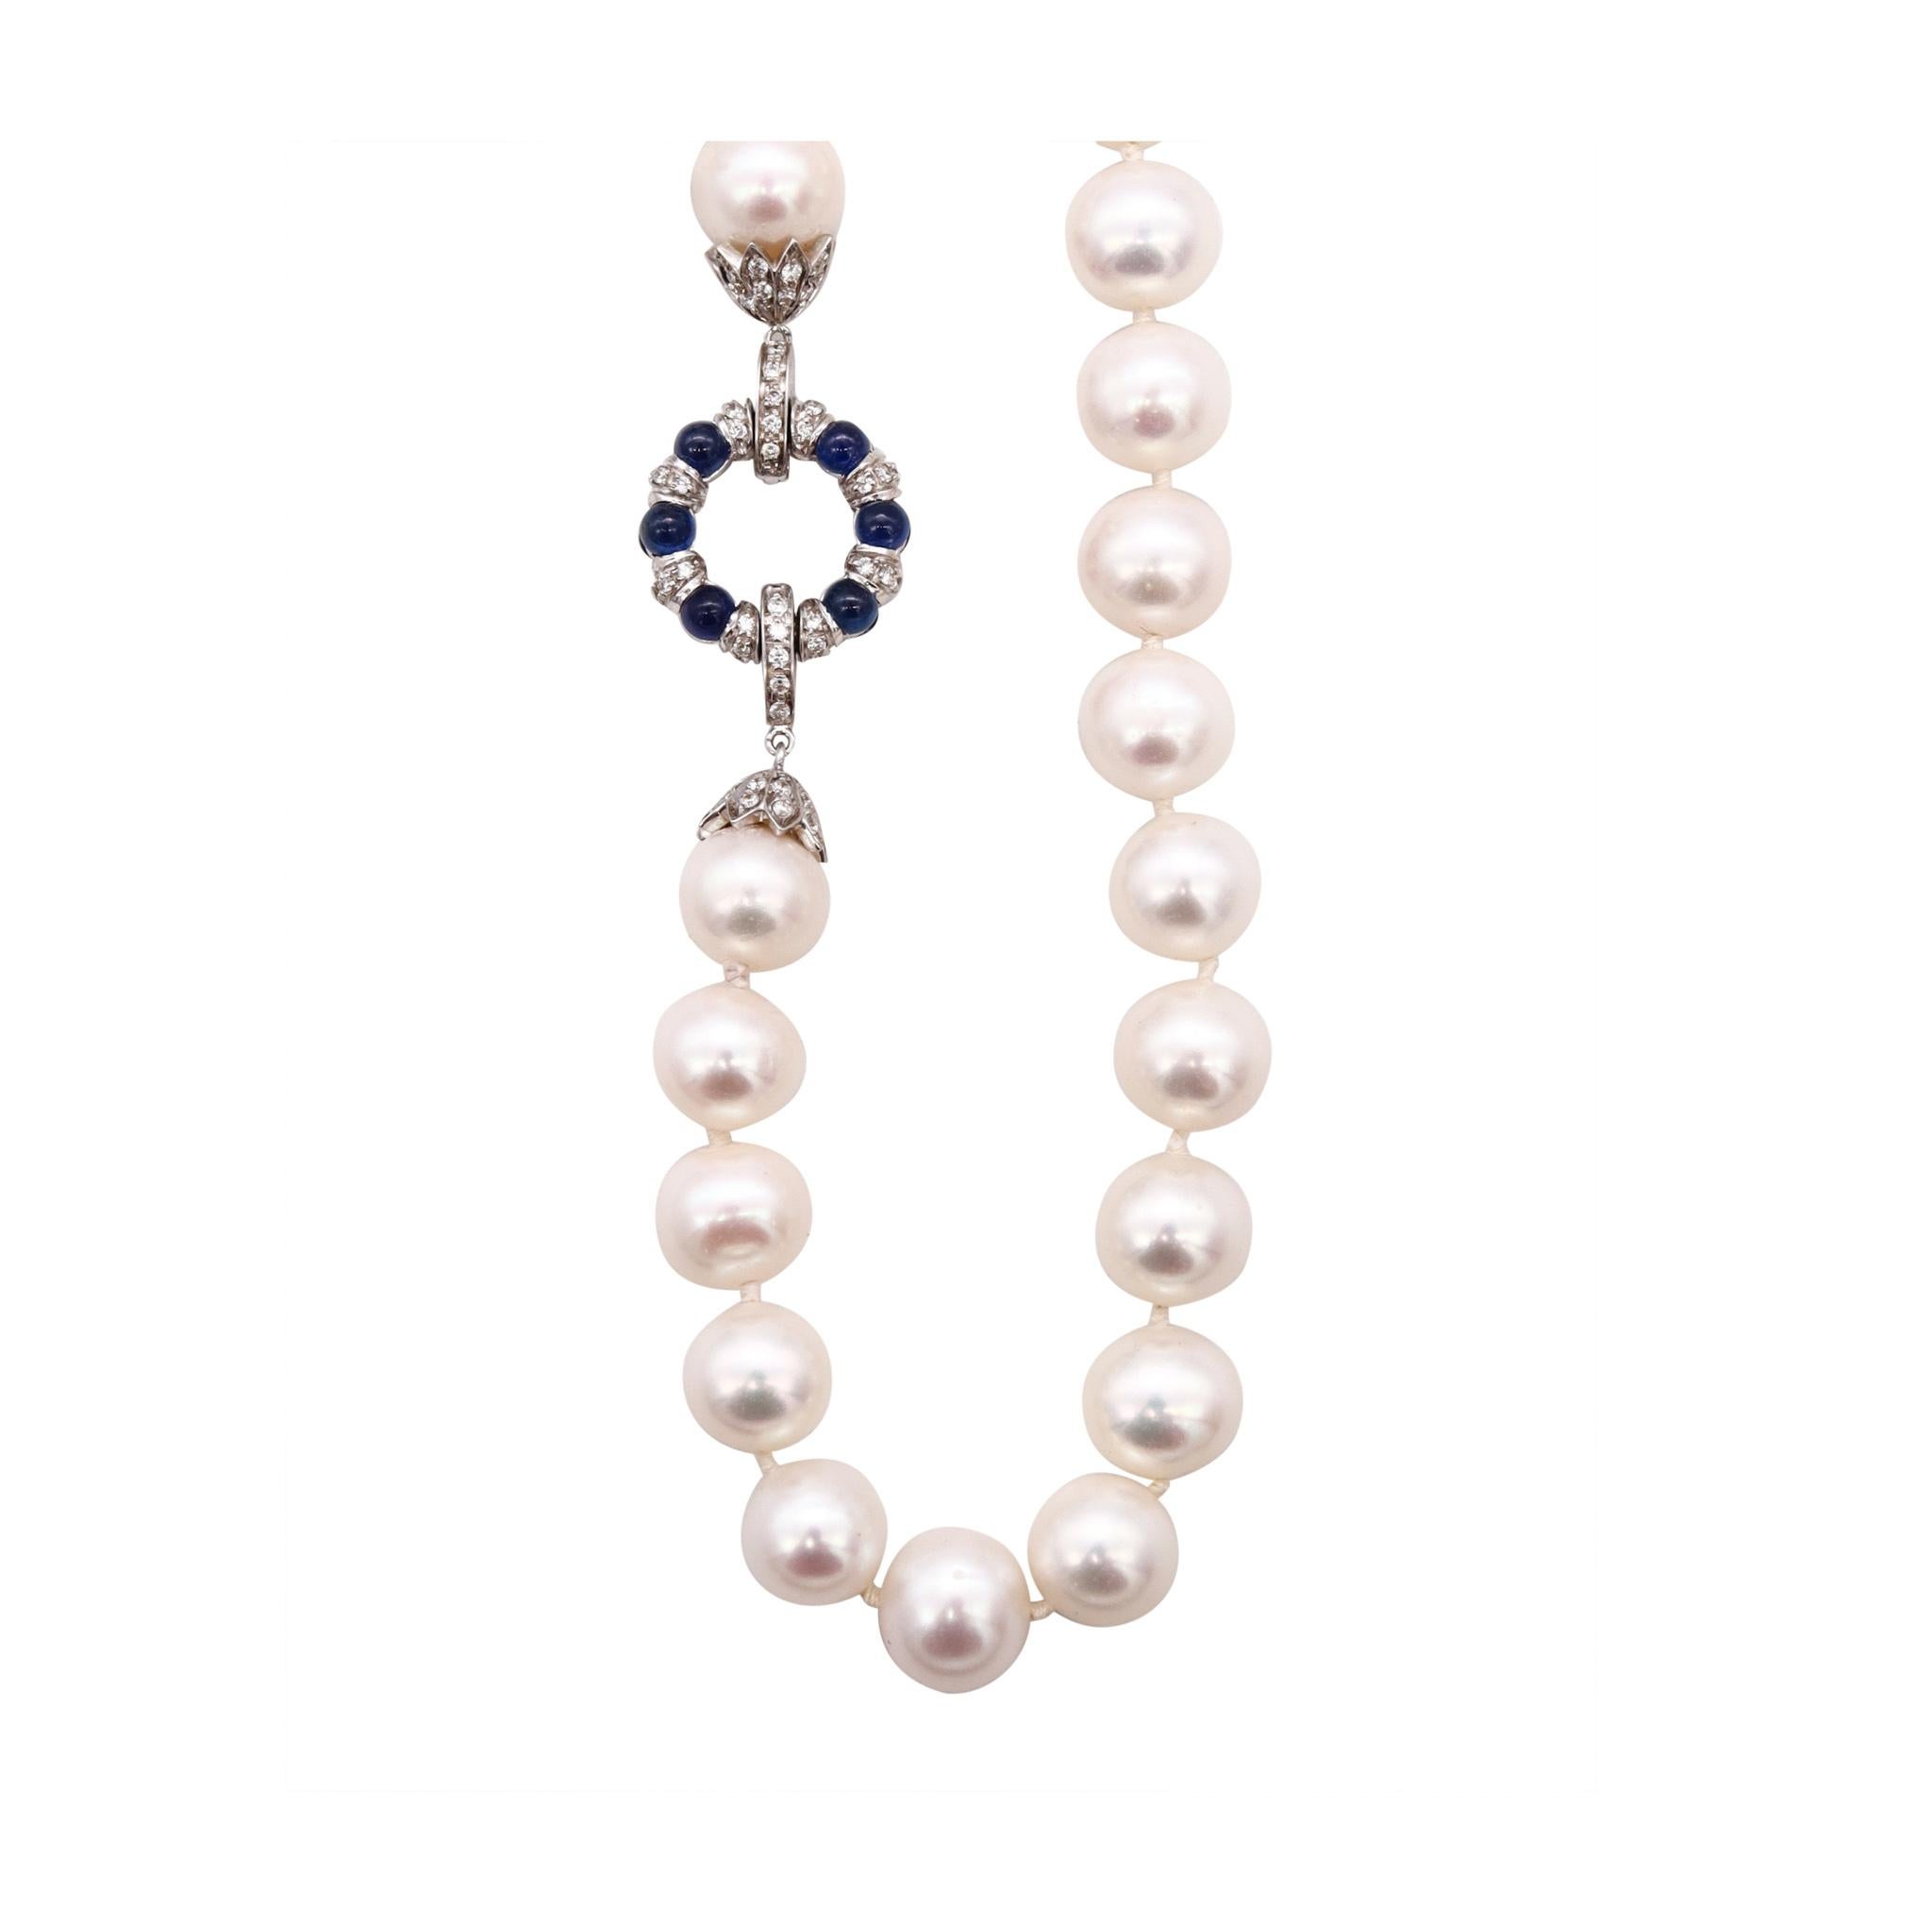 An Akoya pearls necklace designed by Favero.

Gorgeous necklace made in Italy by the jewelry house of Favero. It was crafted in solid white gold and Akoya pearls of 10 mm .

The lock is mount, with 12 round cabochon cut of natural Ceylon blue